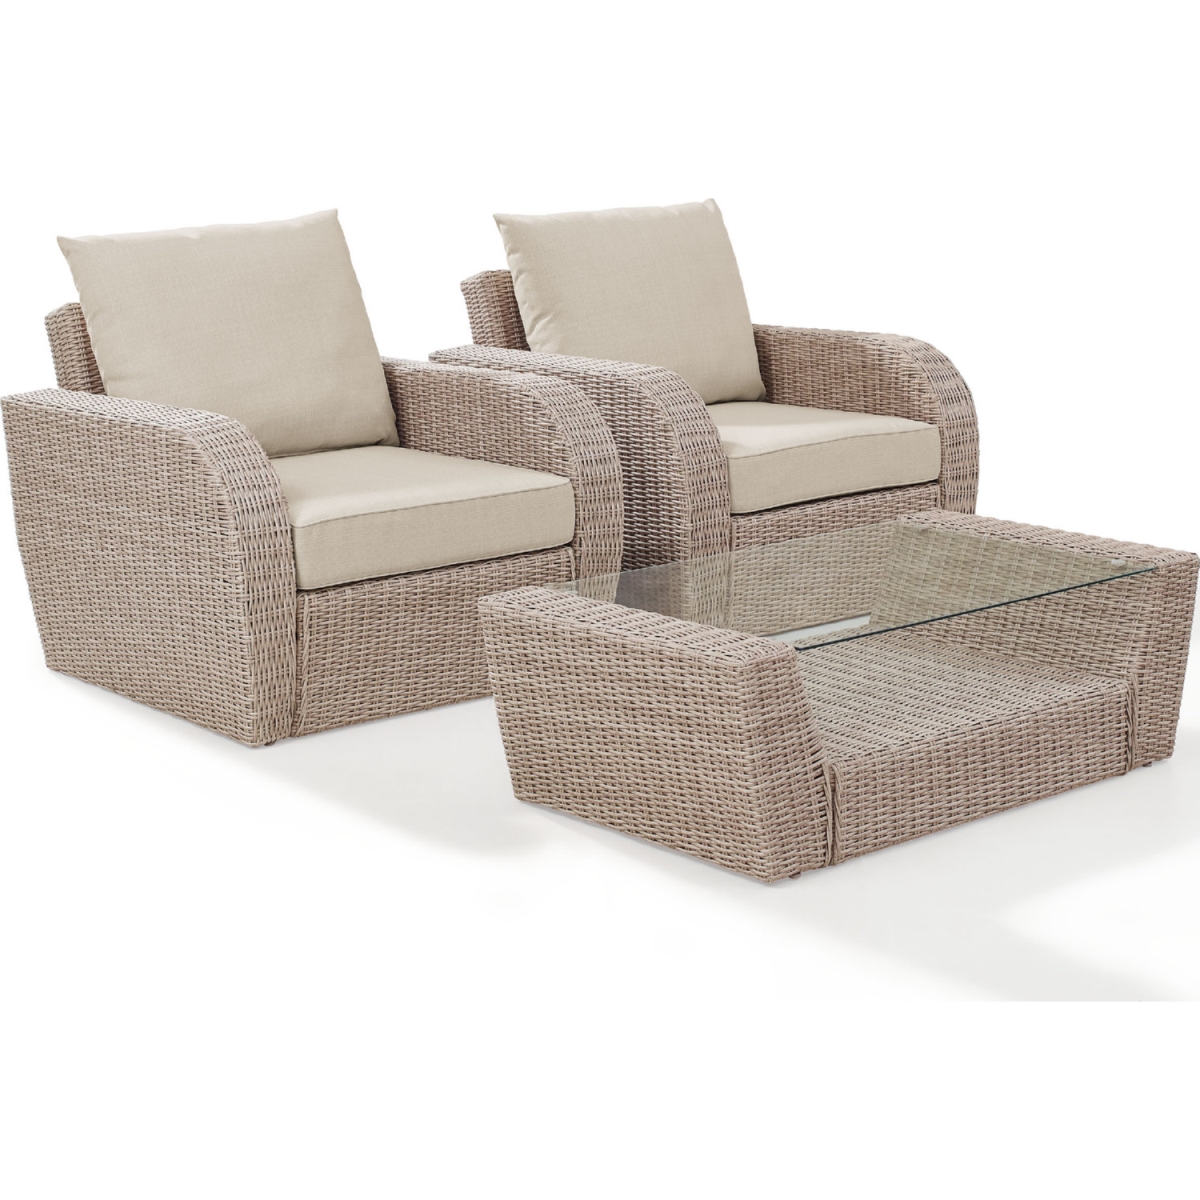 Ko70135wh-ol 3 Piece St. Augustine Outdoor Wicker Seating Set With Oatmeal Cushion - Two Outdoor Wicker Chairs, Coffee Table